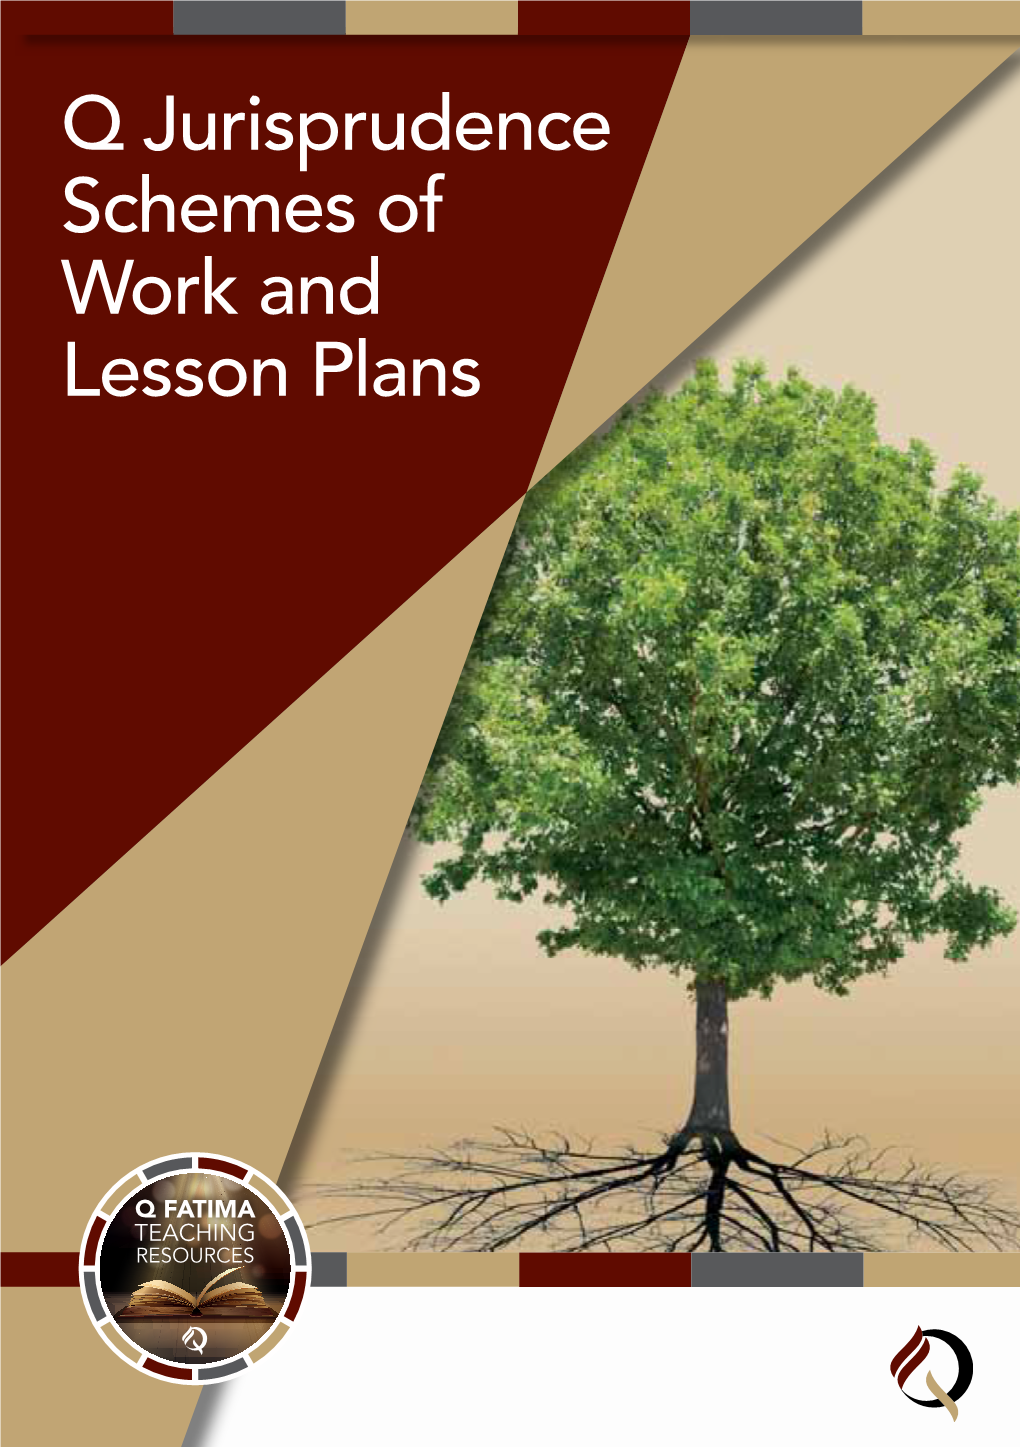 Q Jurisprudence Schemes of Work and Lesson Plans